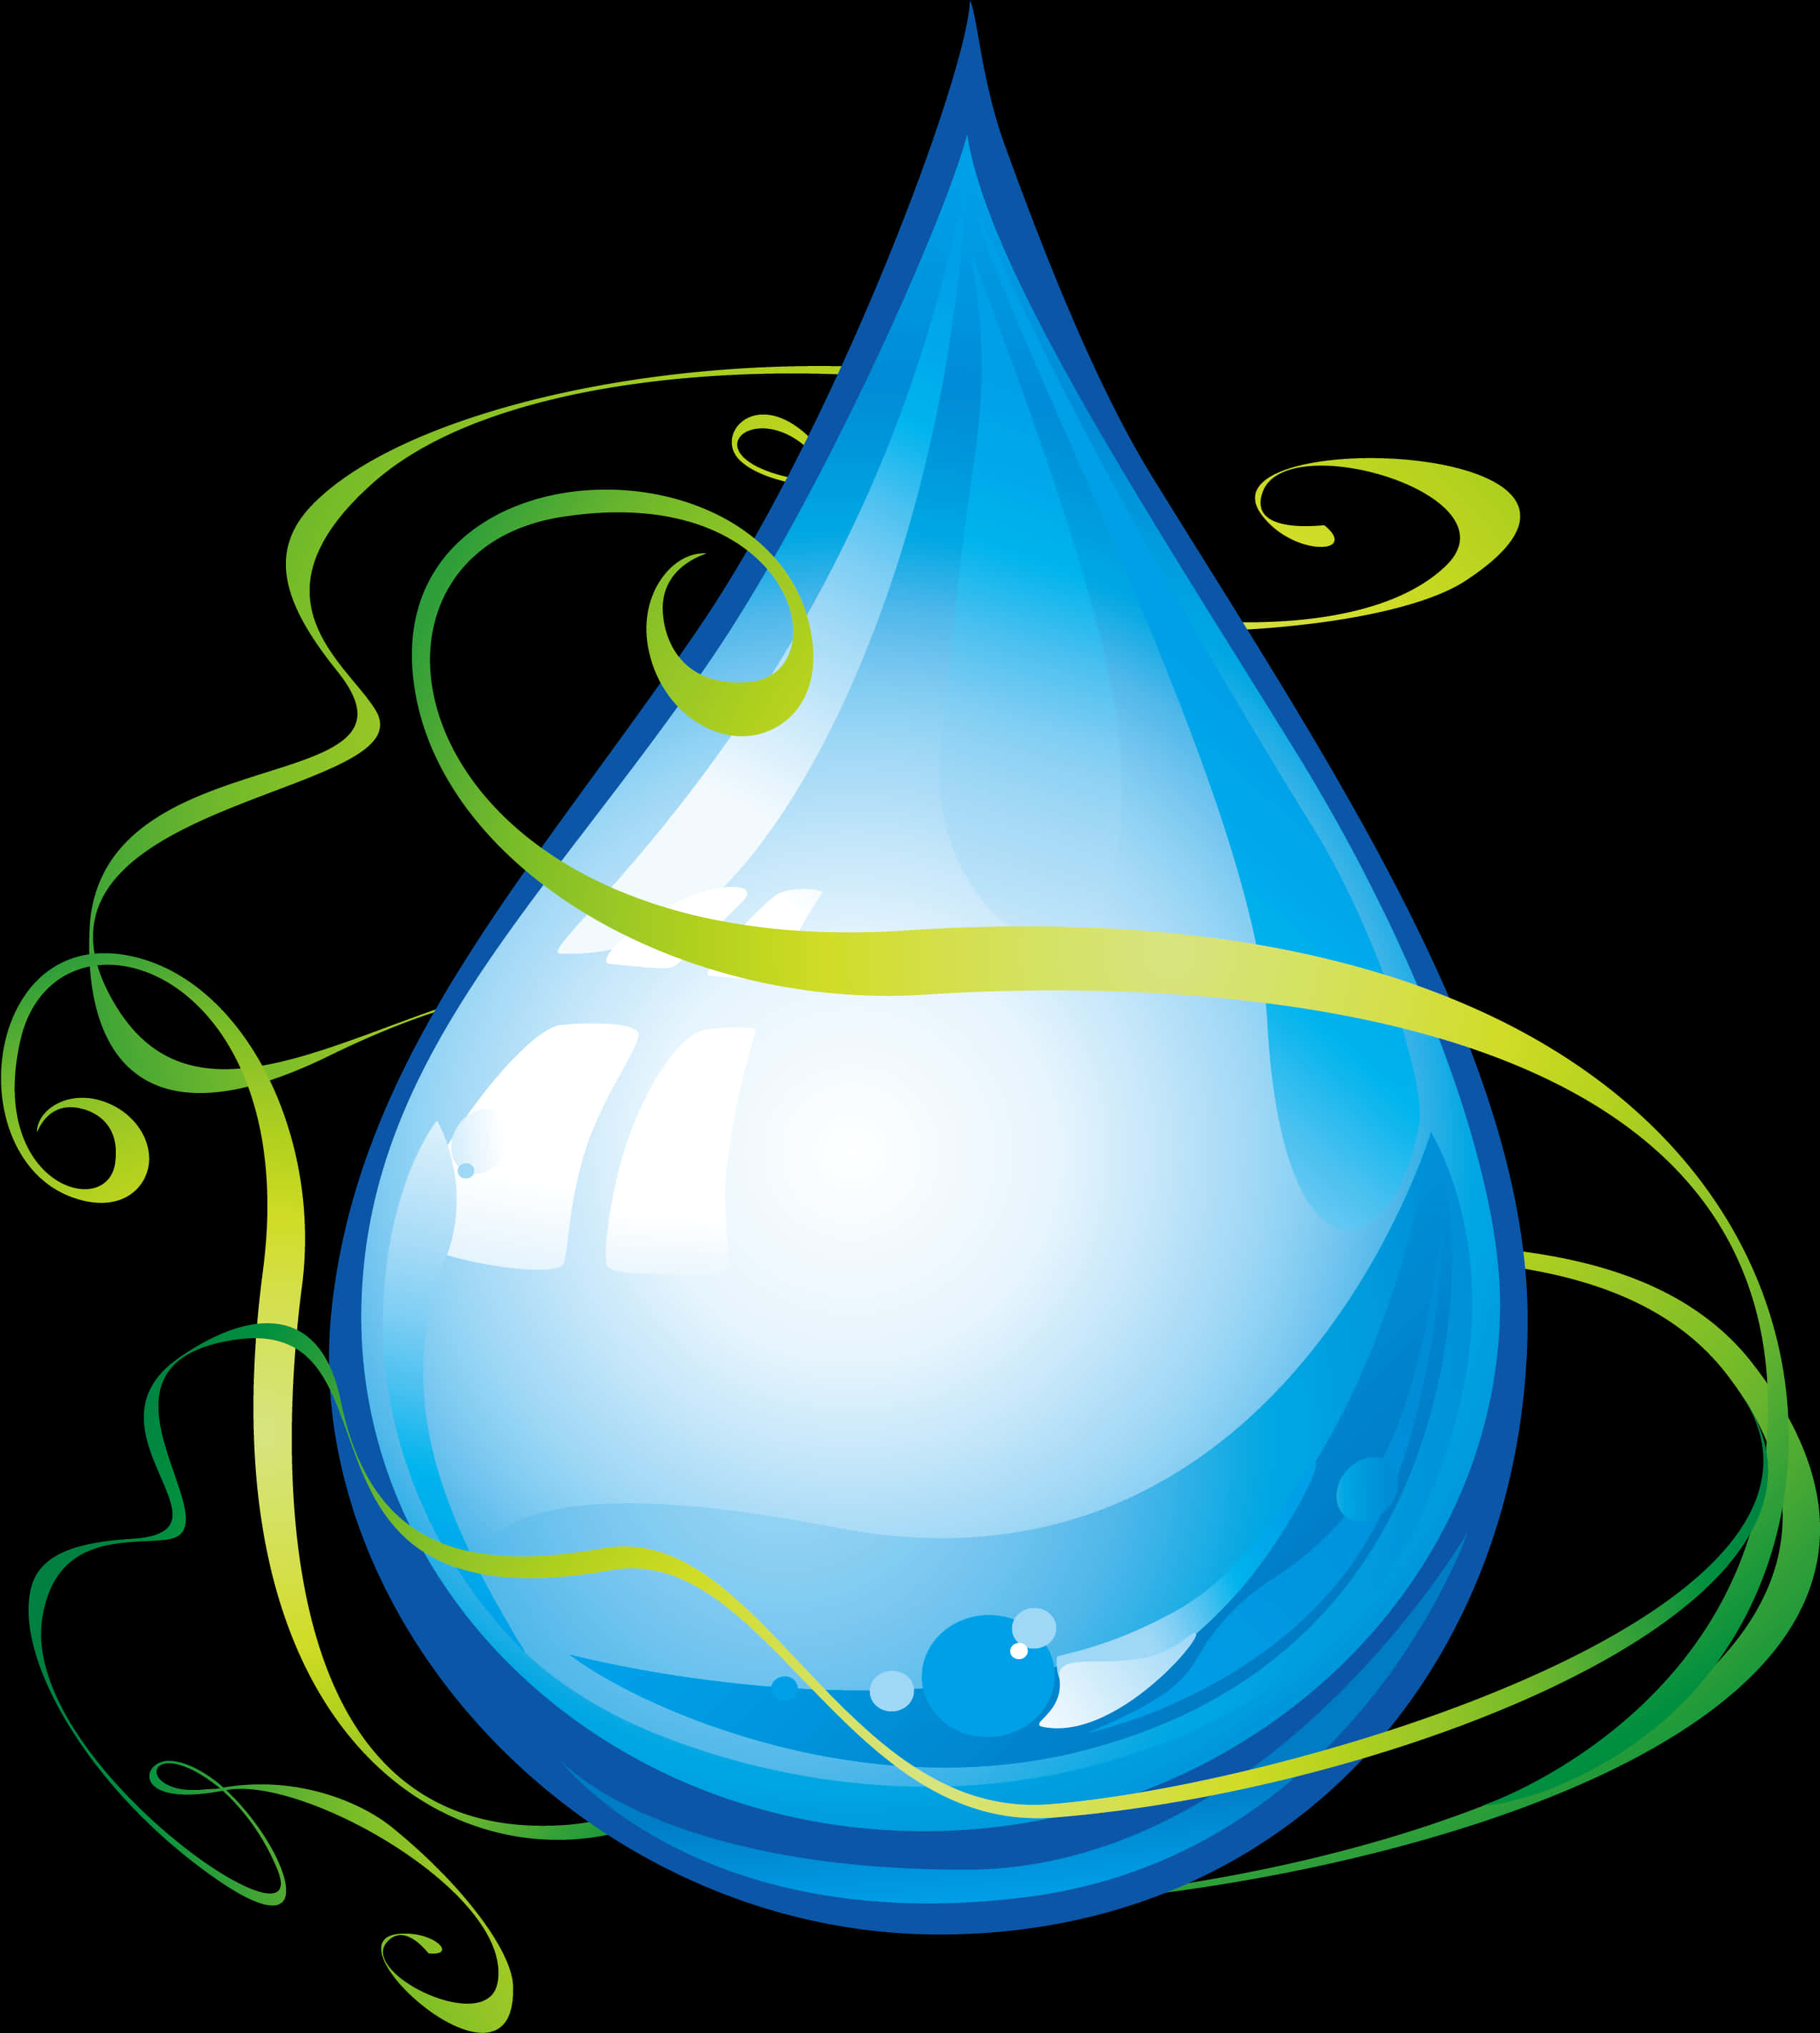 Stylized Water Drop Graphic PNG